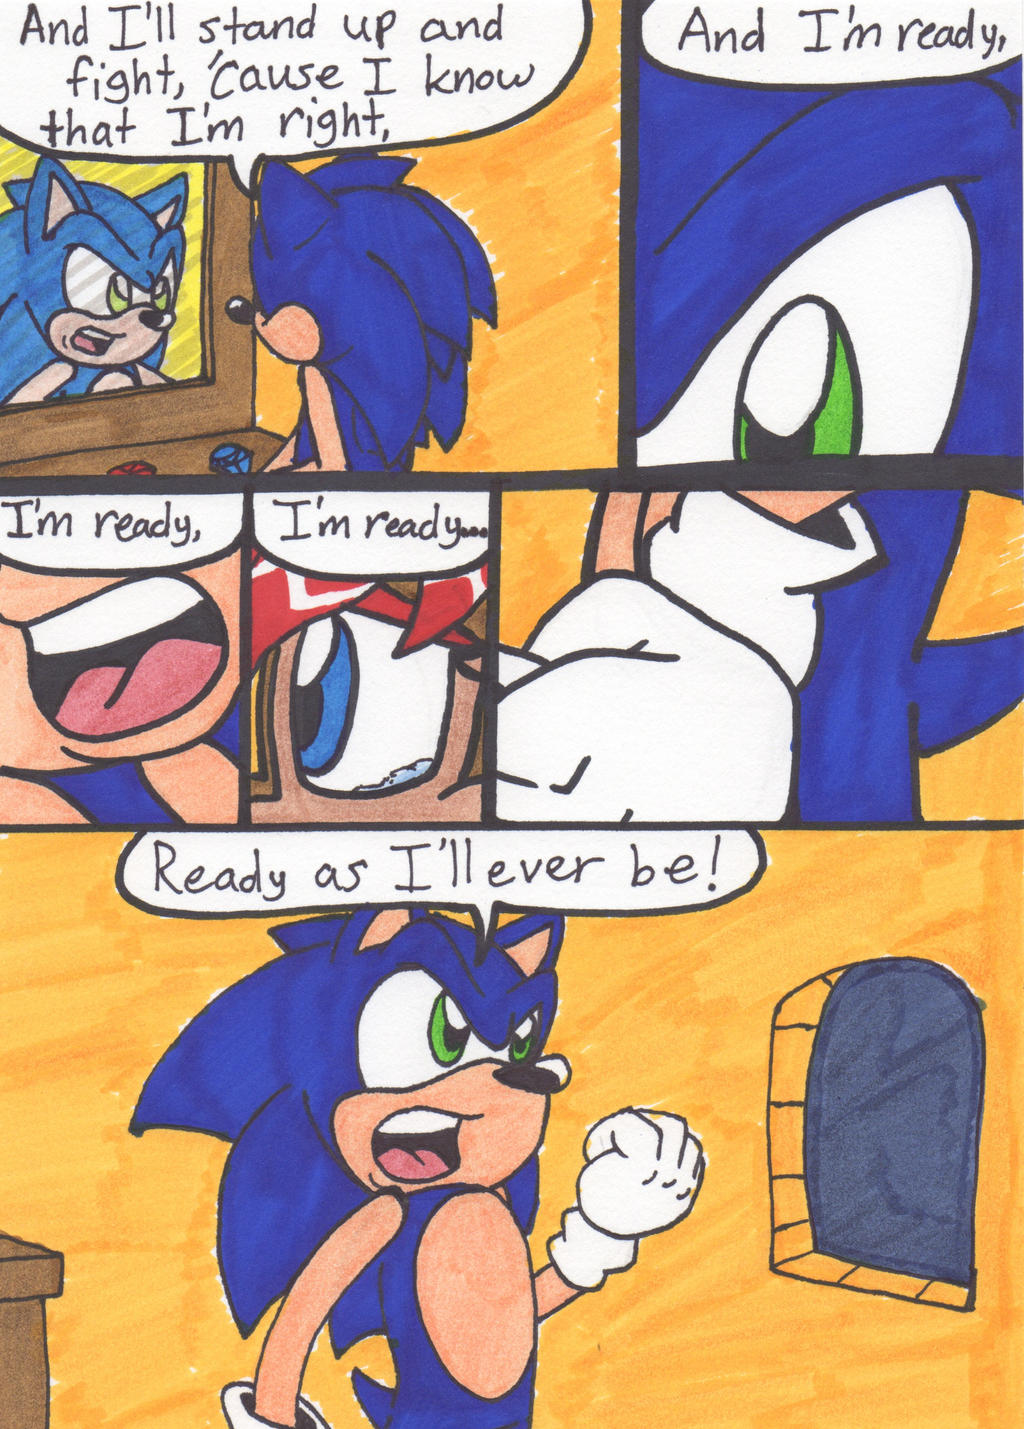 I'll Rescue You This Time by SonicSpirit128 on DeviantArt